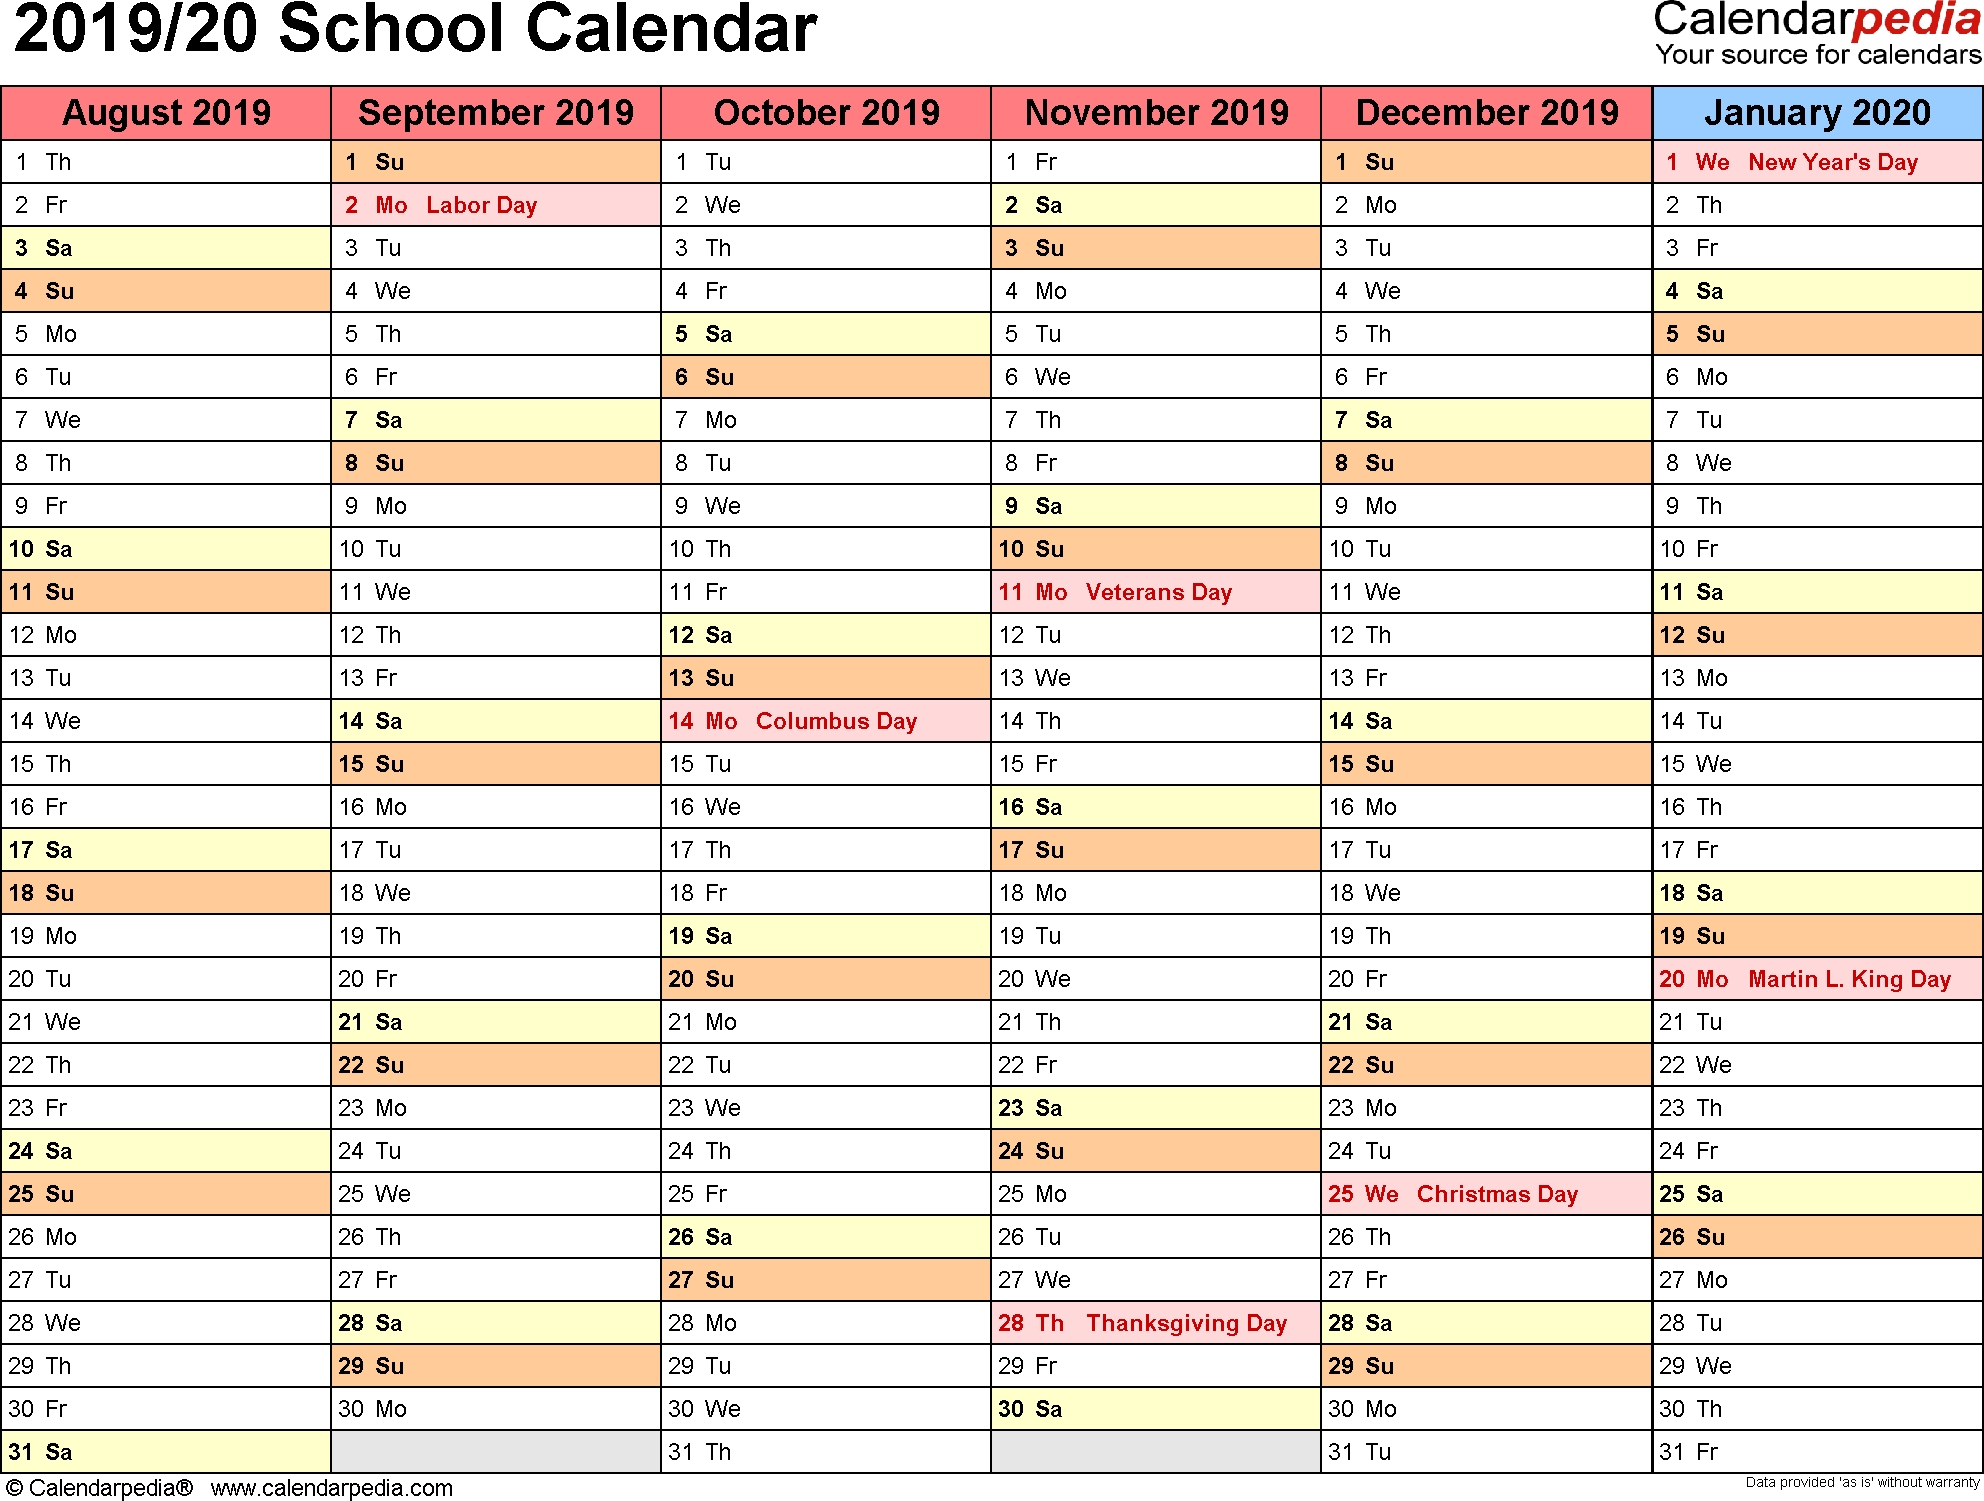 School Calendars 2019/2020 As Free Printable Pdf Templates with School Year At A Glance Calendar 2019-2020